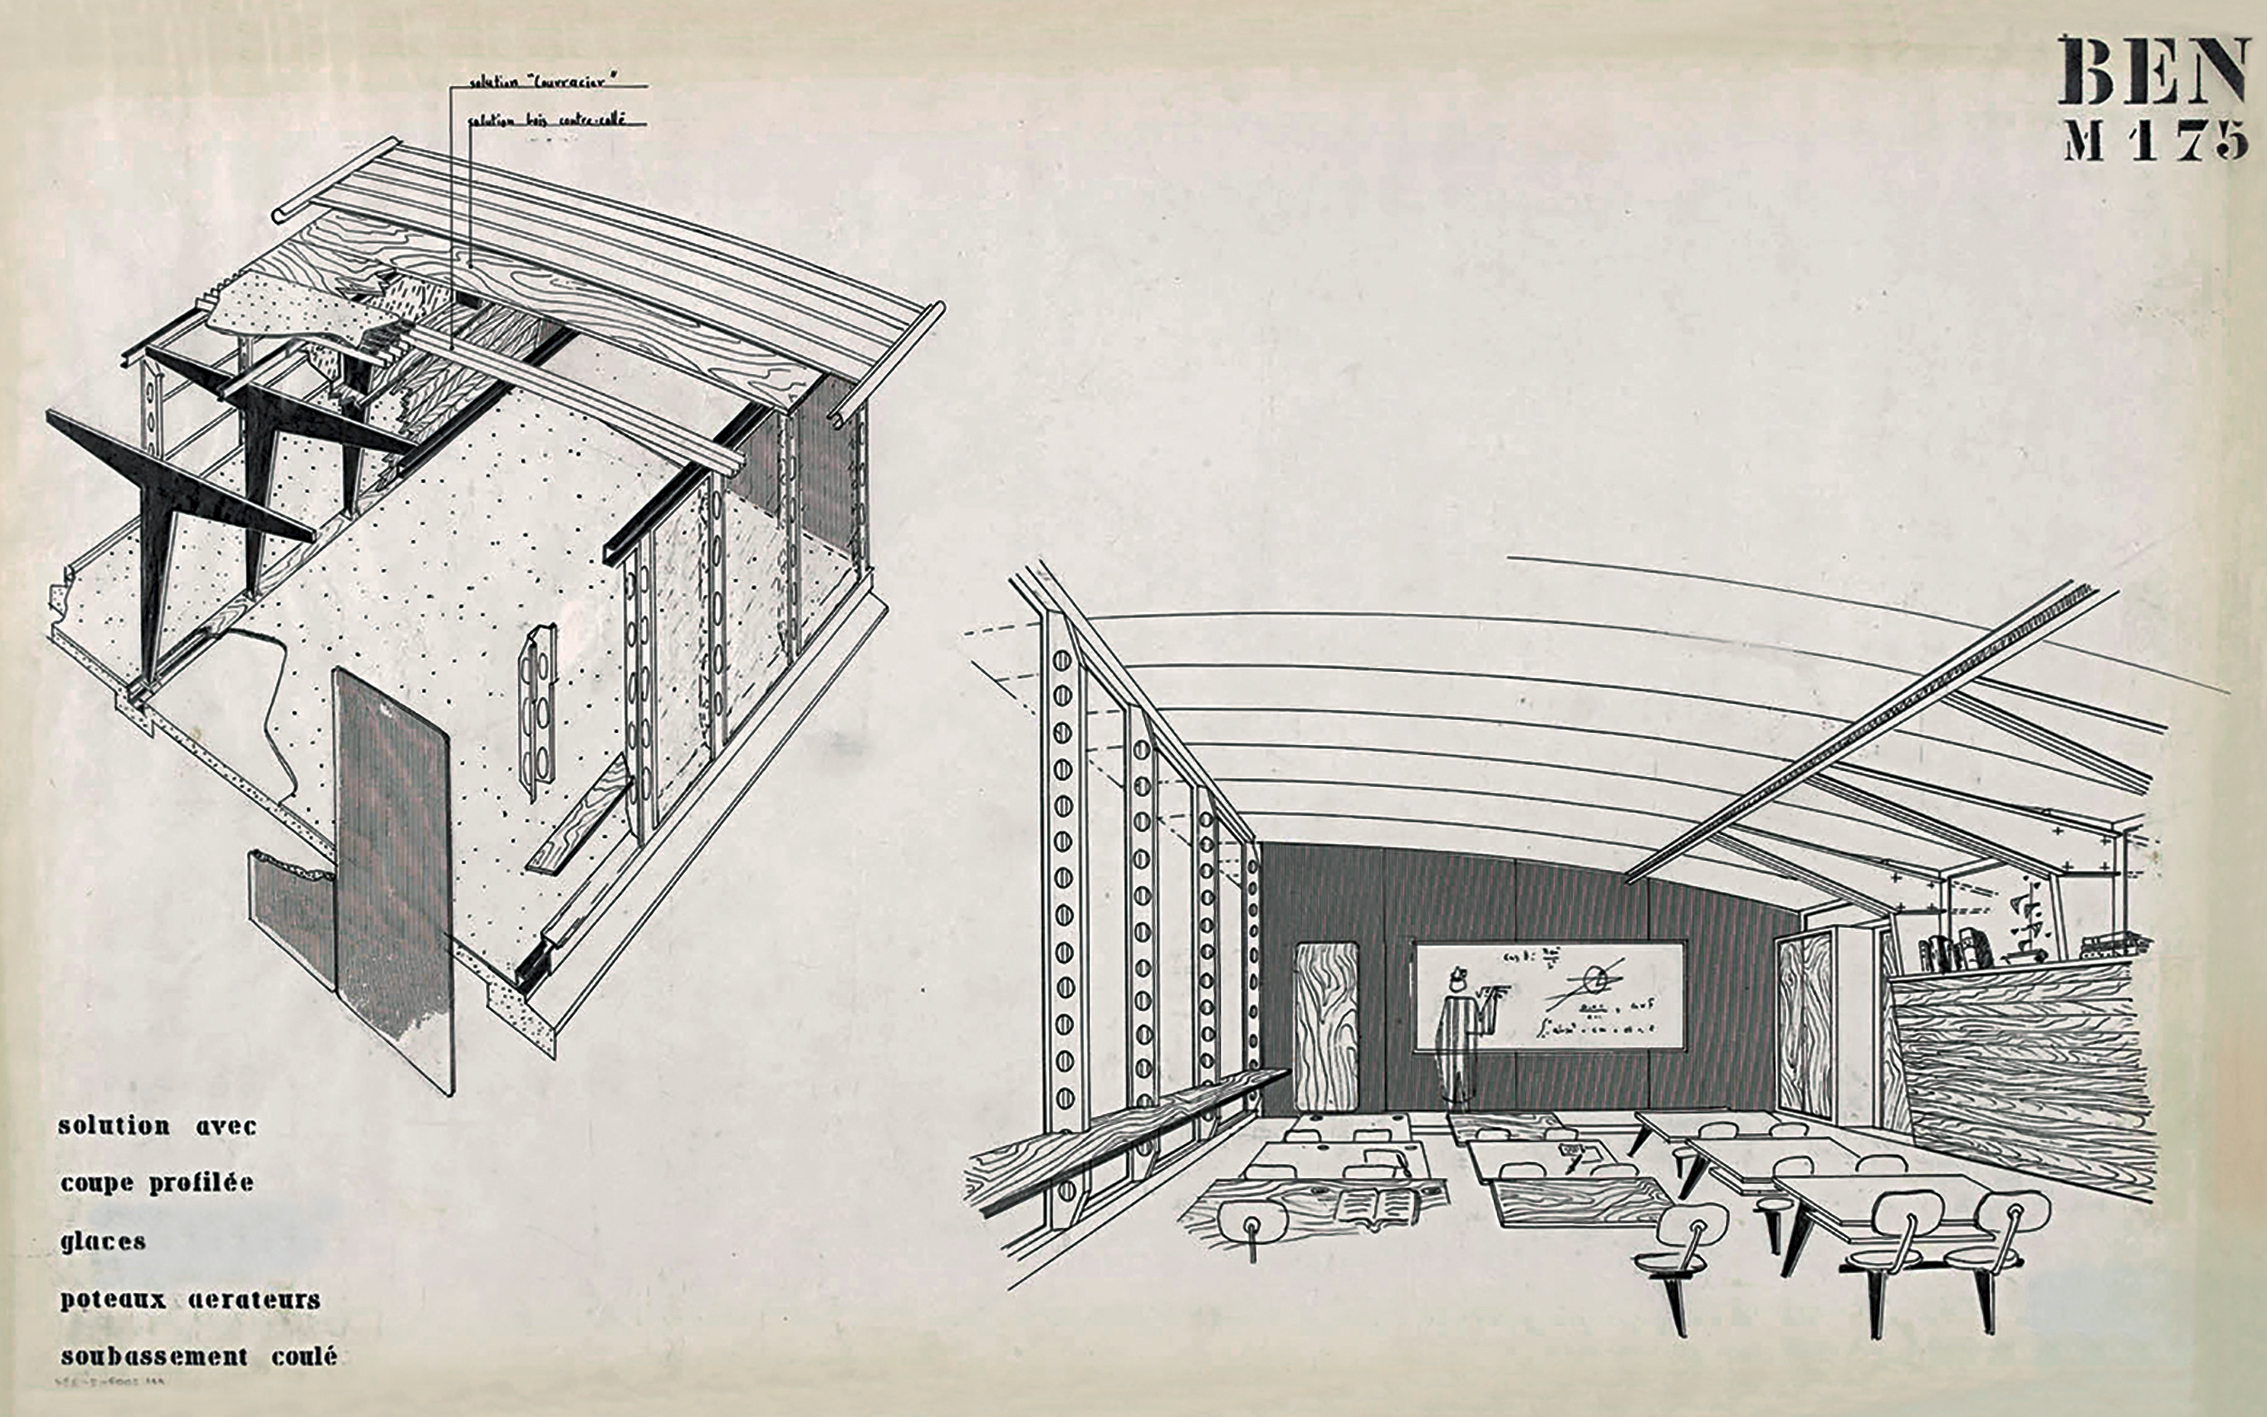 Les Constructions Jean Prouvé. “Solution with profiled section, glazing, ventilating posts, poured wall base”. Proposal for a variant with vertical facade and concrete floor for the BEN M175 school (National Education Building, grid 175 centimeters), ca. 1958